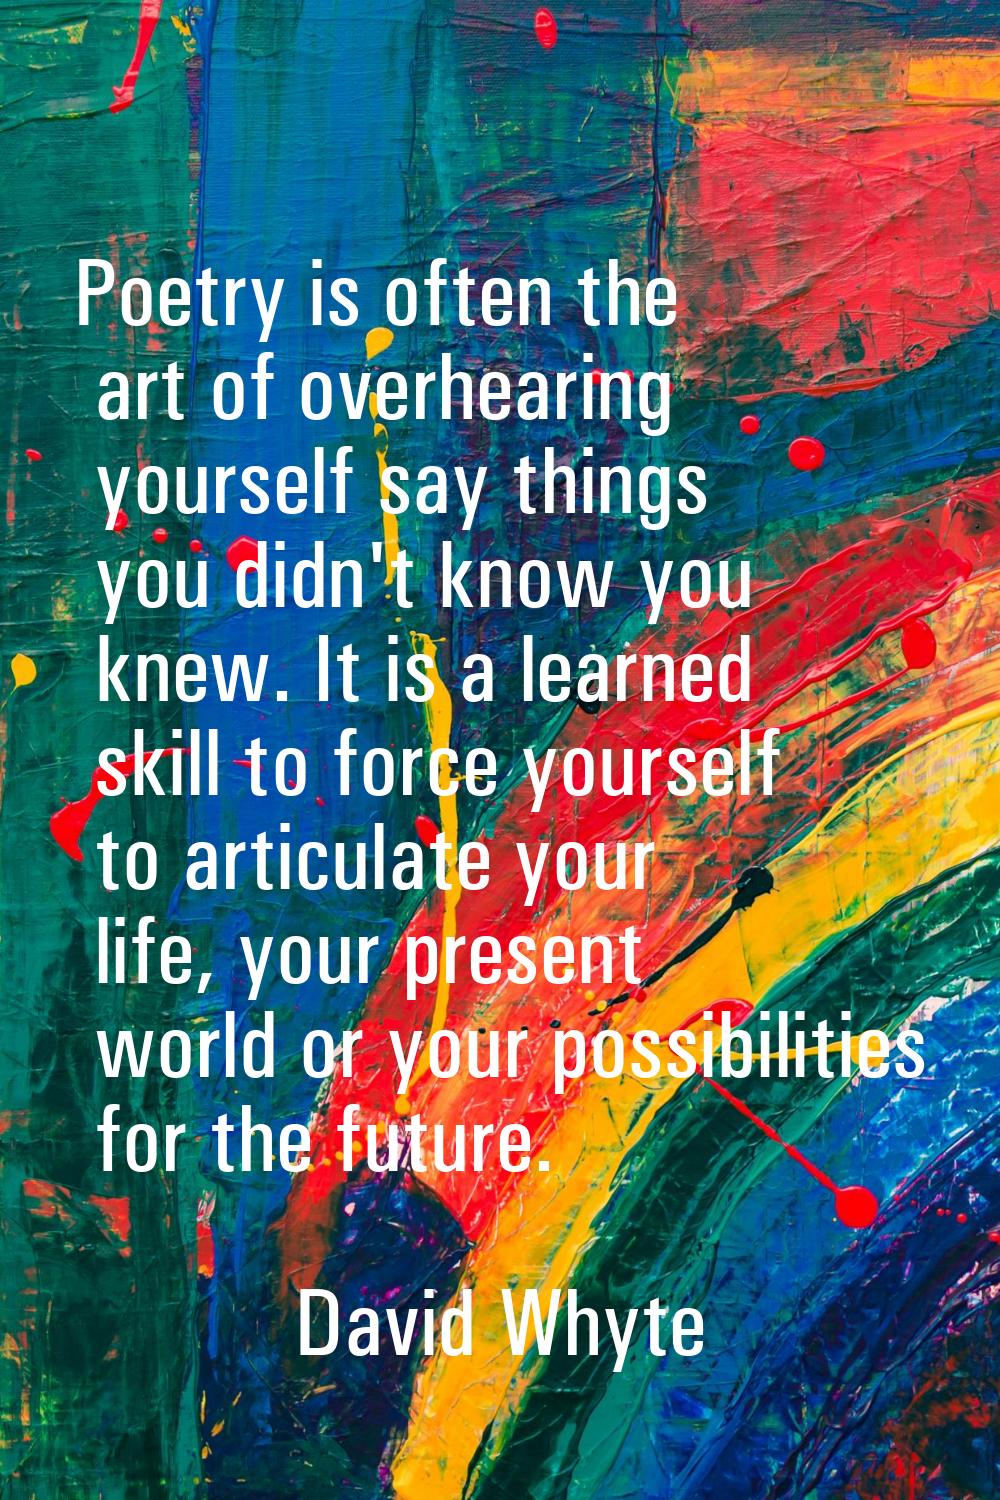 Poetry is often the art of overhearing yourself say things you didn't know you knew. It is a learne